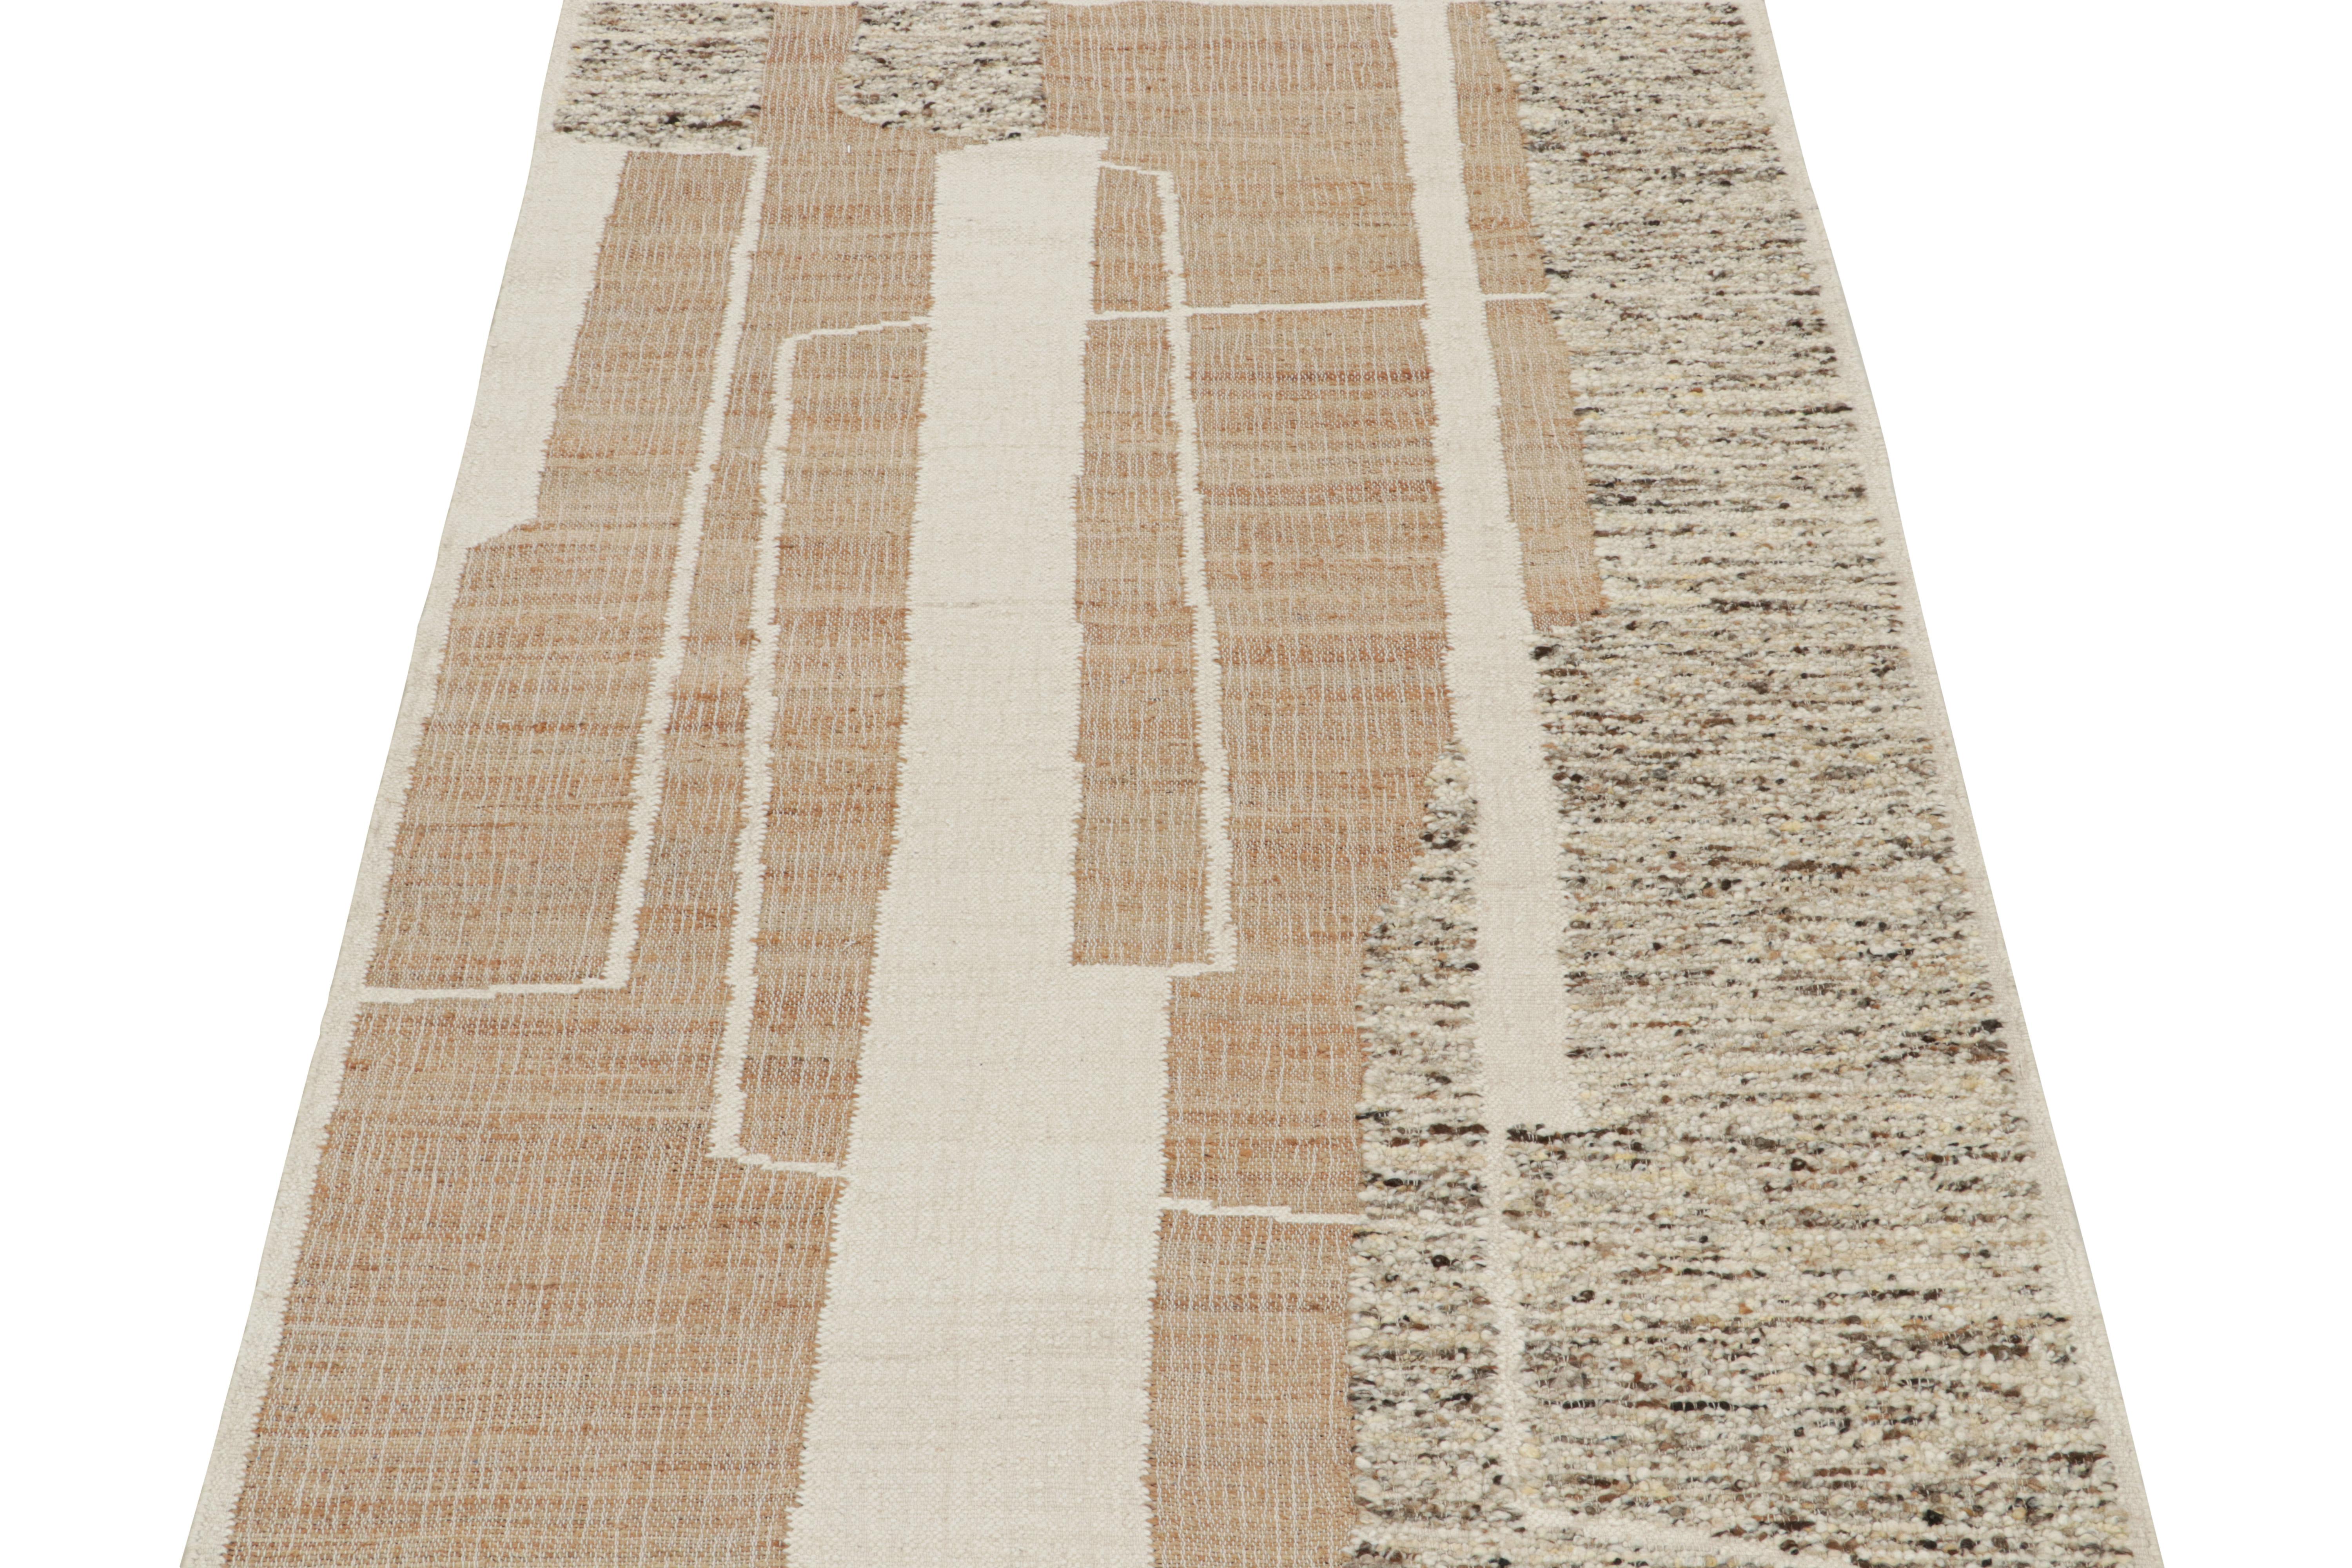 Handwoven in wool & jute, this 5x8 piece is a grand new entry to Rug & Kilim’s modern flatweave collection.

On the Design:

The kilim rug carries an abstract design in beige-brown & white. The aesthetics of the piece further enjoy a brilliant